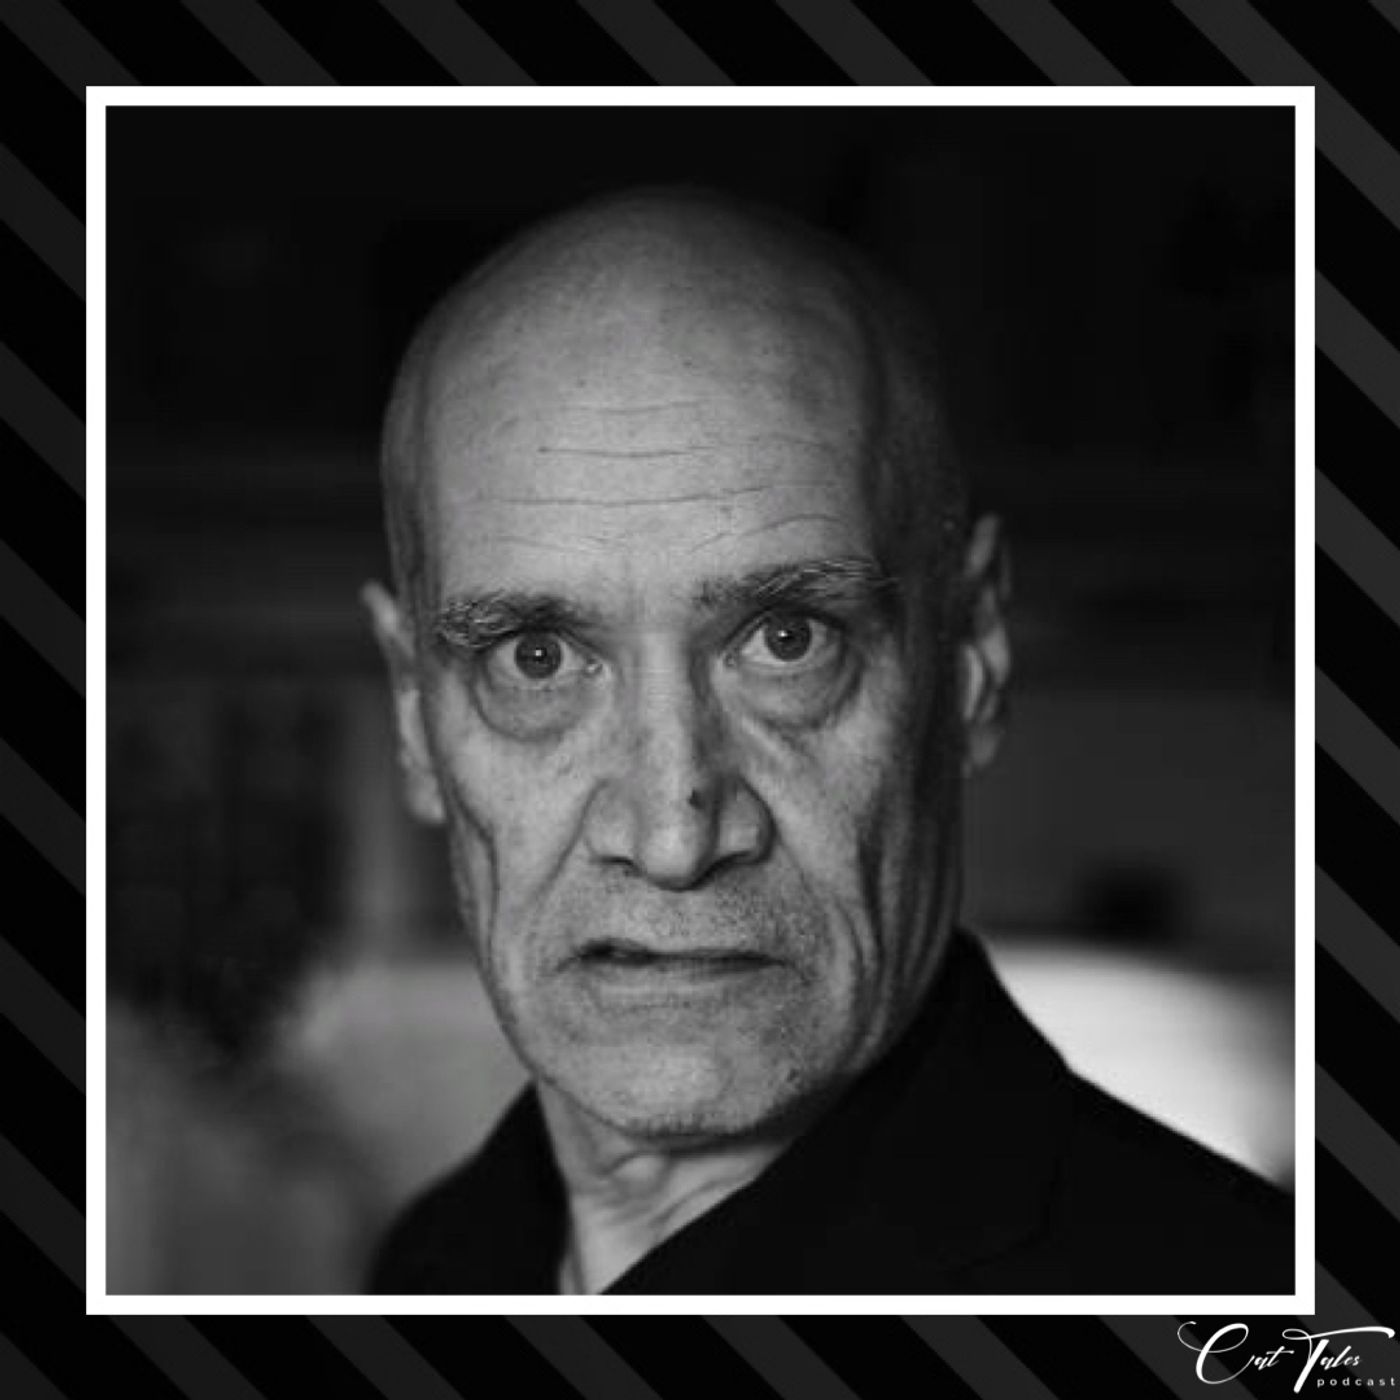 124: The one with Dr Feelgood's Wilko Johnson